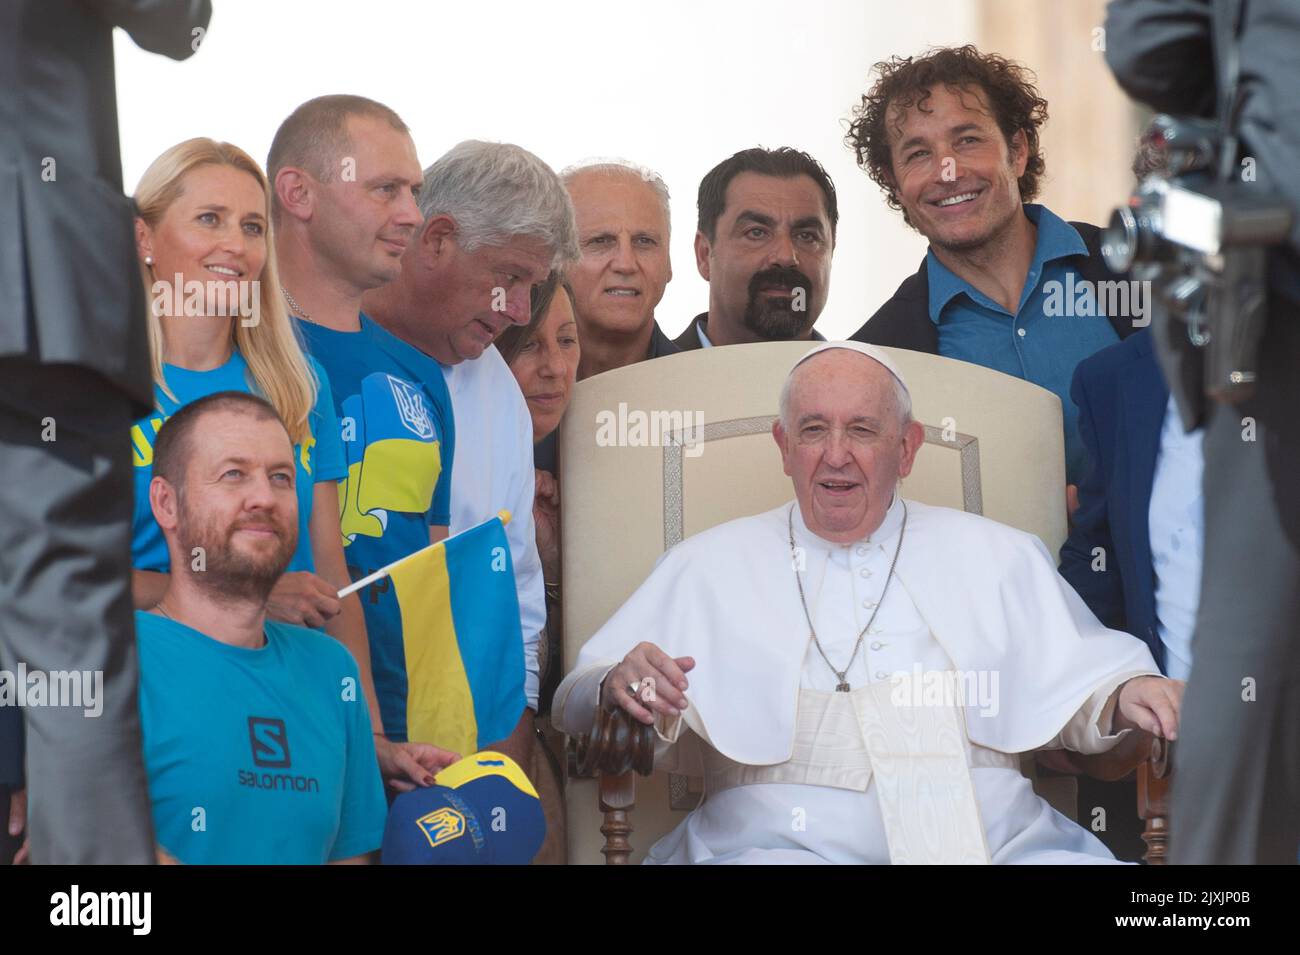 Rome, Italia. 07th Sep, 2022. Italy, Rome, Vatican, 22/09/07. Pope Francis takes a photo with Ukrainian refugees during weekly General Audience in St. Peter's Square.Papa Francesco scatta una foto con i rifugiati ucraini durante l'udienza generale settimanale in Piazza San Pietro. Photo by Massimiliano MIGLIORATO/Catholic Press Photo Credit: Independent Photo Agency/Alamy Live News Stock Photo